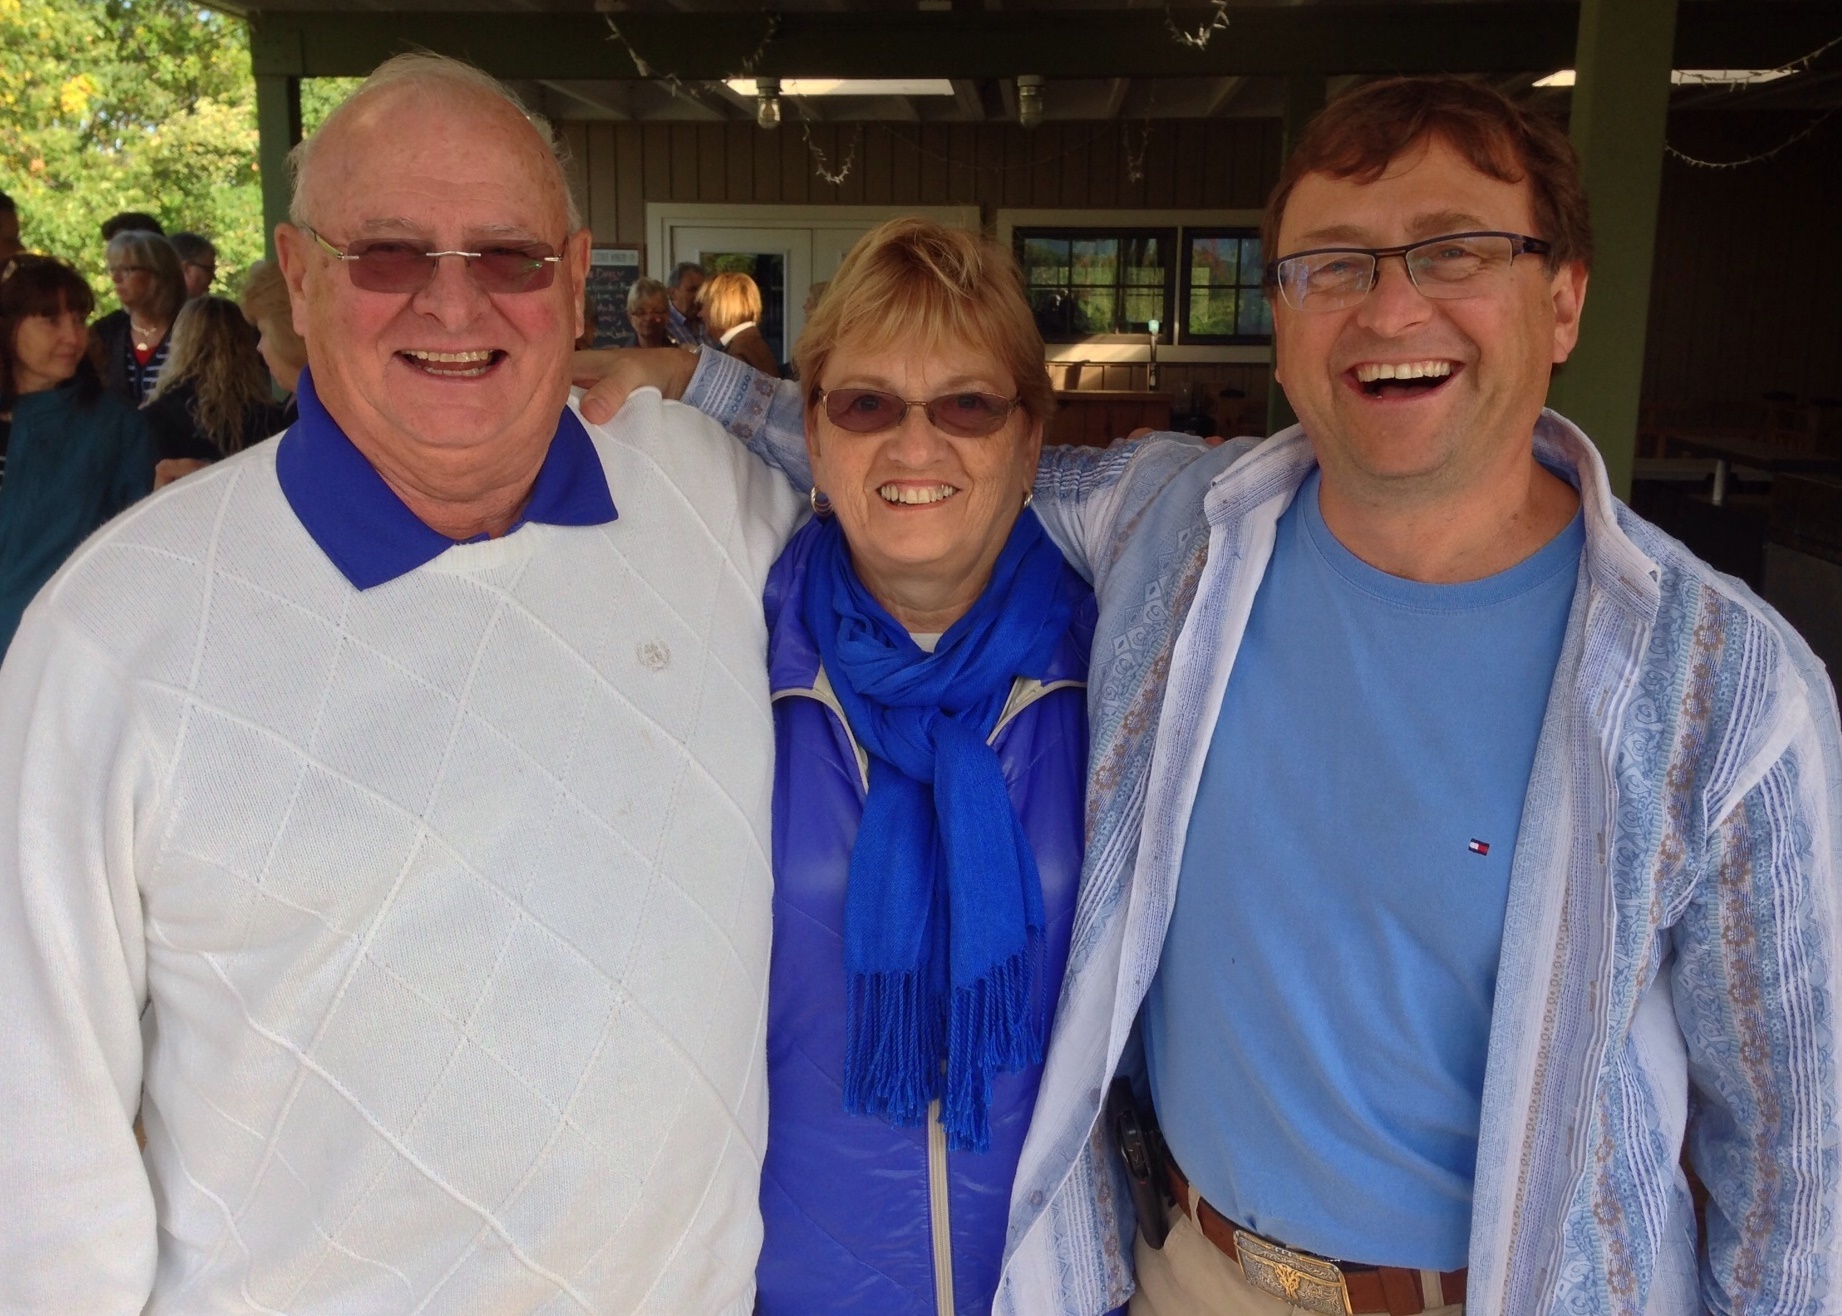 Mike with his mom & dad on 2014 Wine Tour